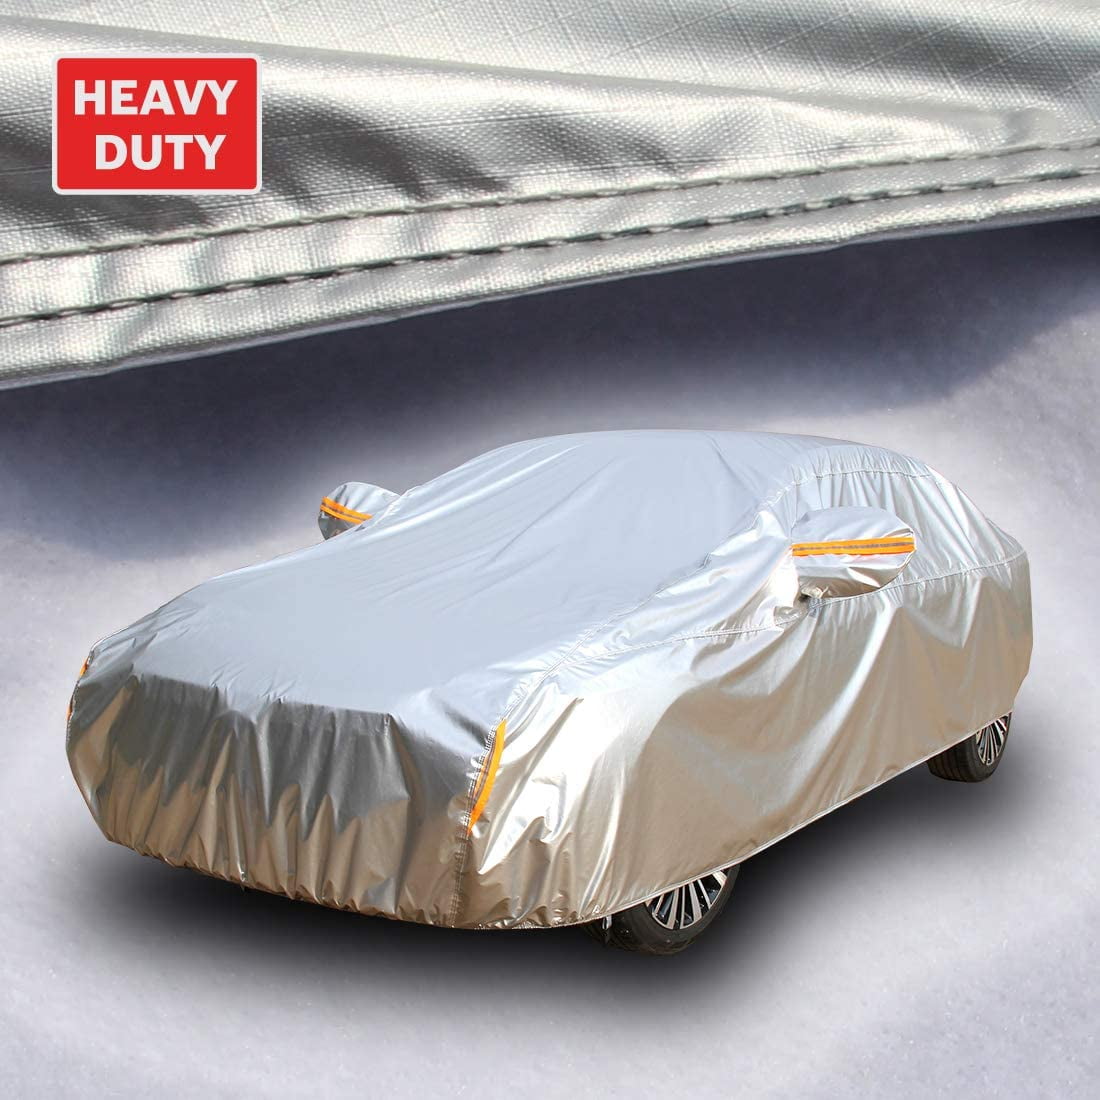 Tecoom Multi-Protection Door Shape Zipper Design Waterproof UV-Proof Windproof Car Cover with Storage and Lock for All Weather Indoor Outdoor Fit 170-190 inches Sedan 